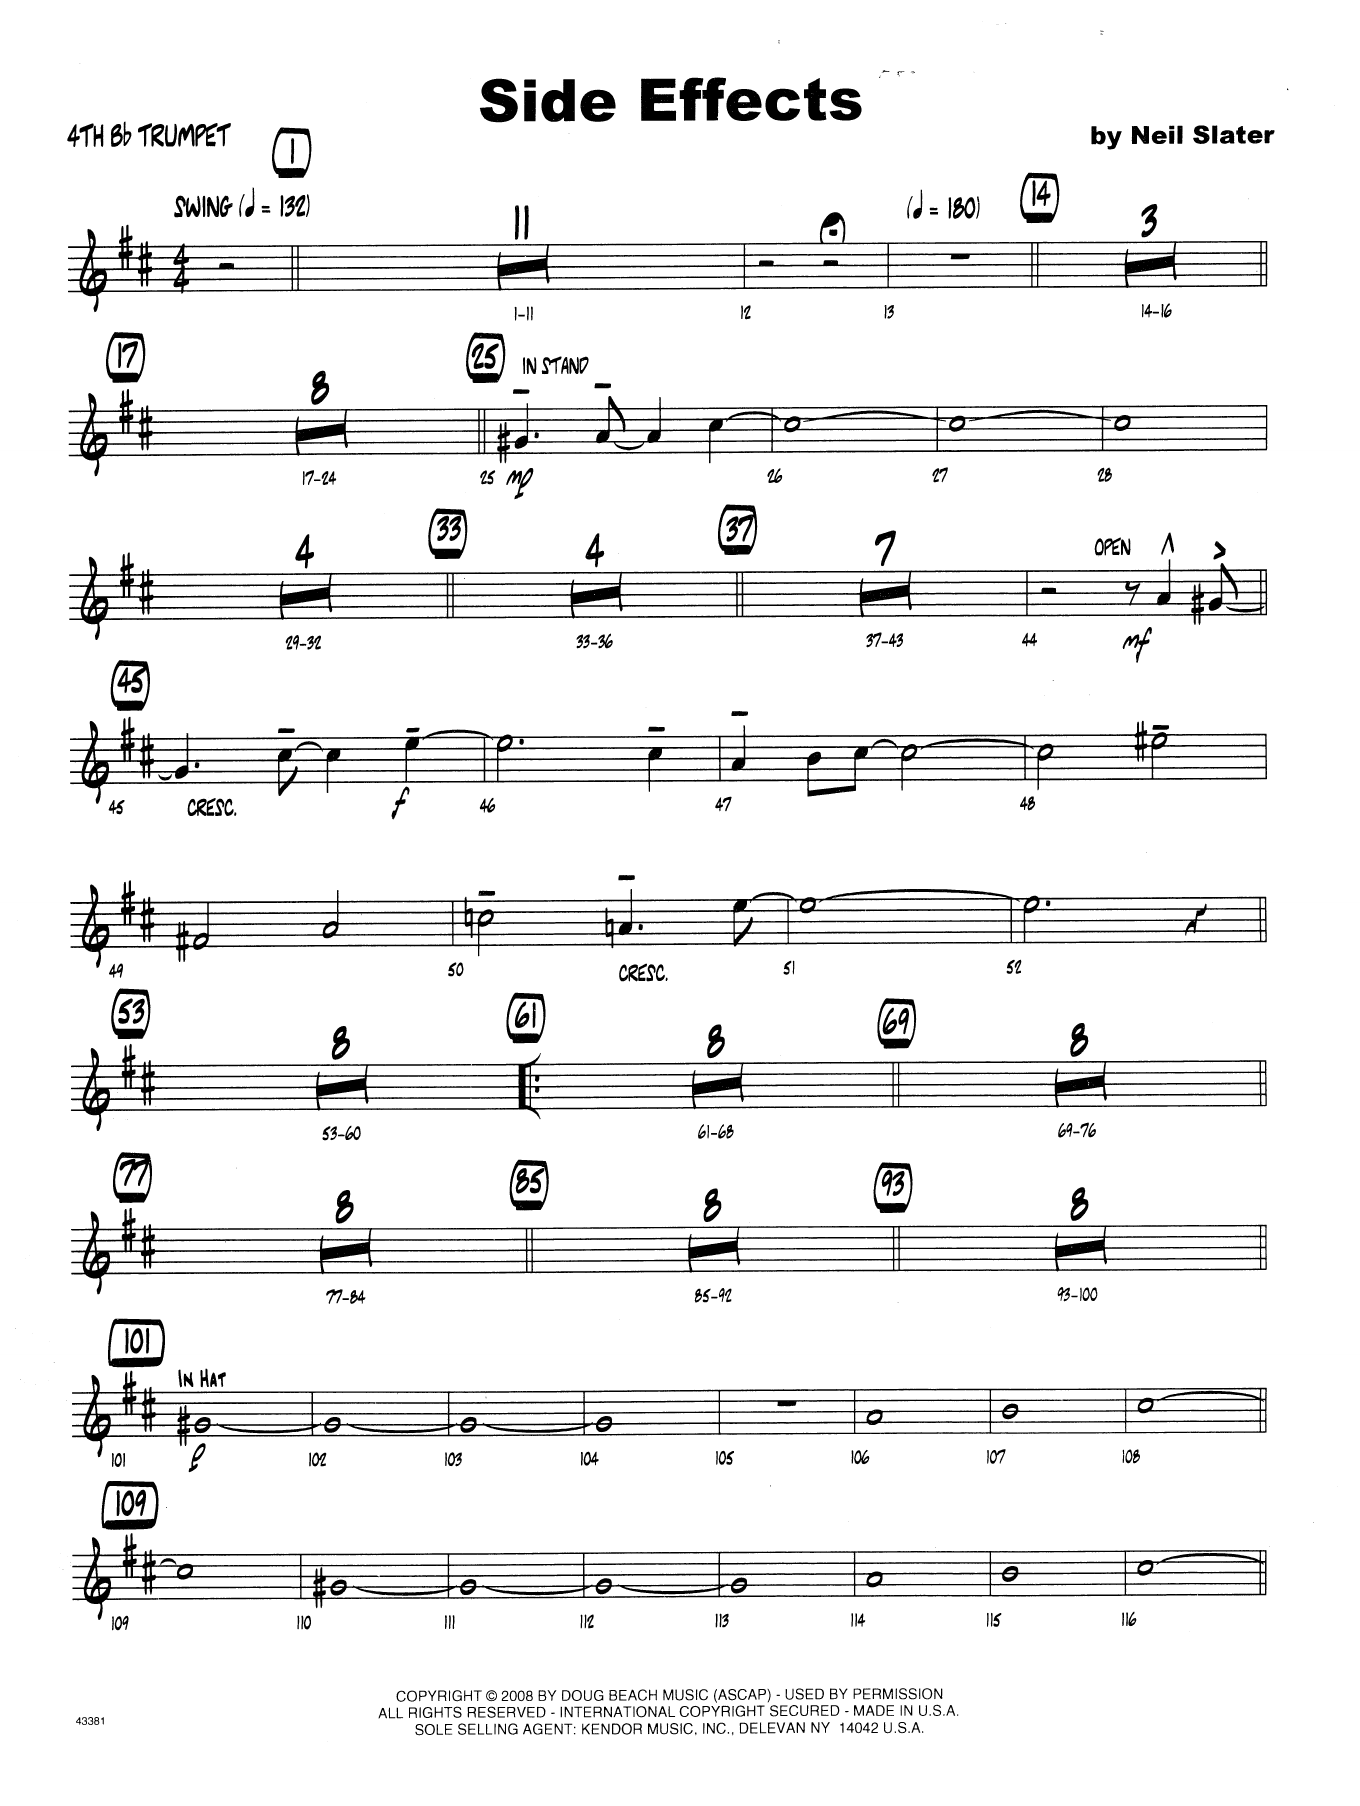 Download Neil Slater Side Effects - 4th Bb Trumpet Sheet Music